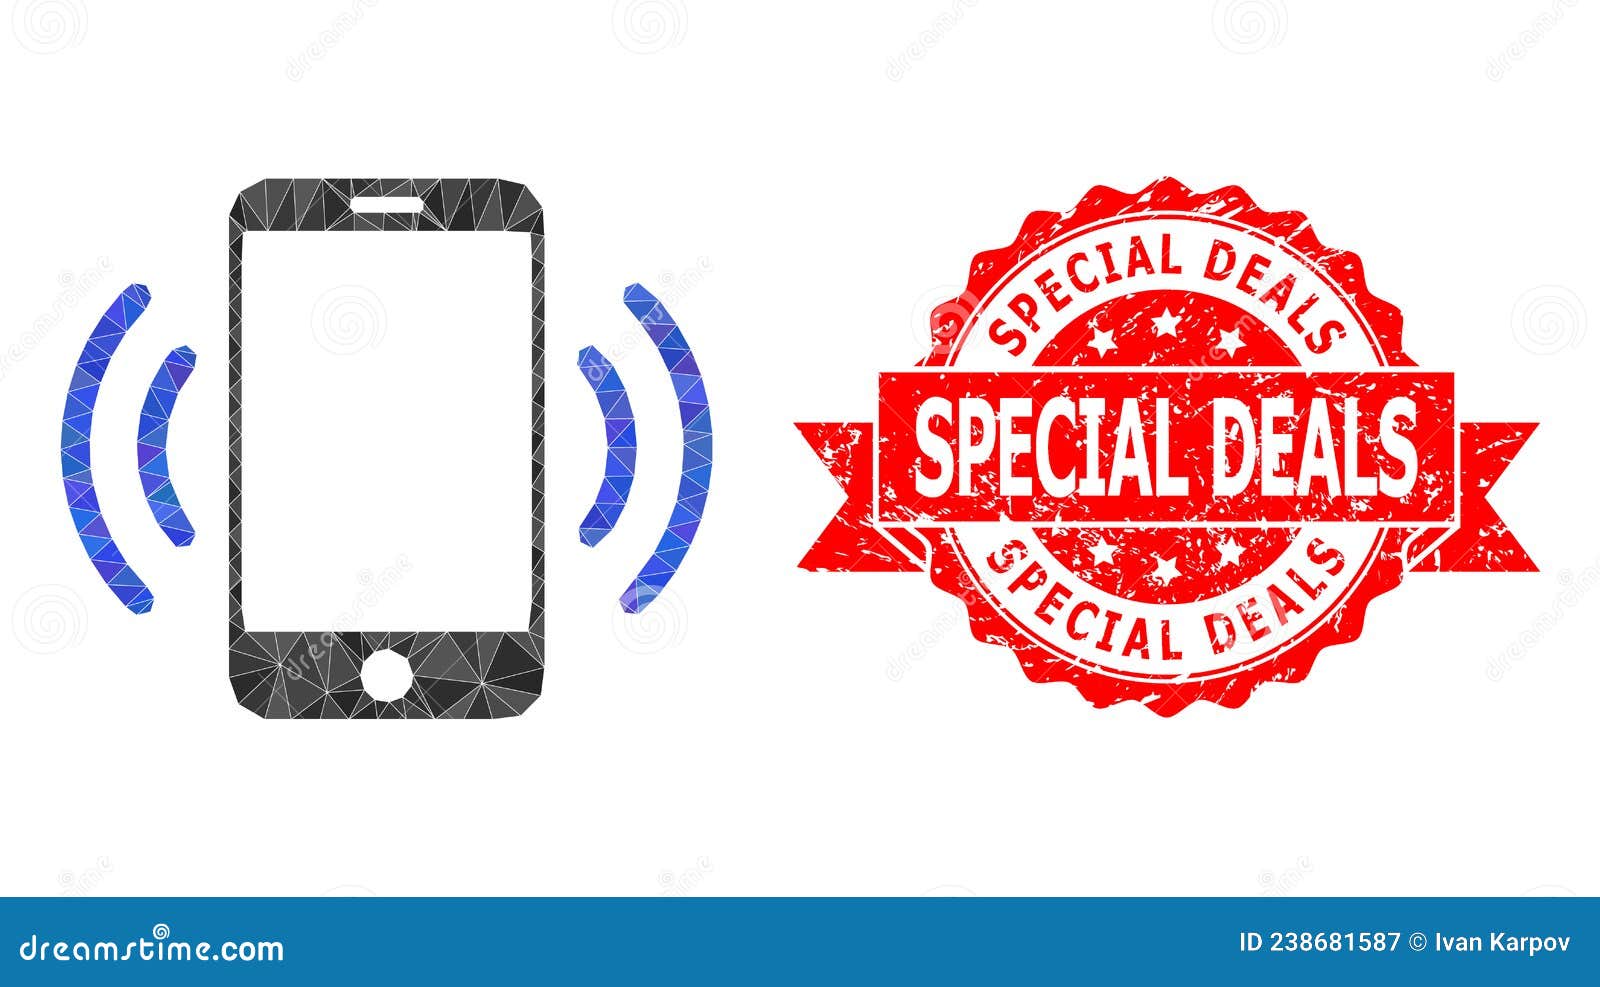 Grunge Special Deals Stamp and Cellphone Vibration Polygonal Mocaic Icon. Low-Poly triangulated cellphone vibration icon illustration, and Special Deals corroded stamp seal. Red stamp seal has Special Deals caption inside ribbon.